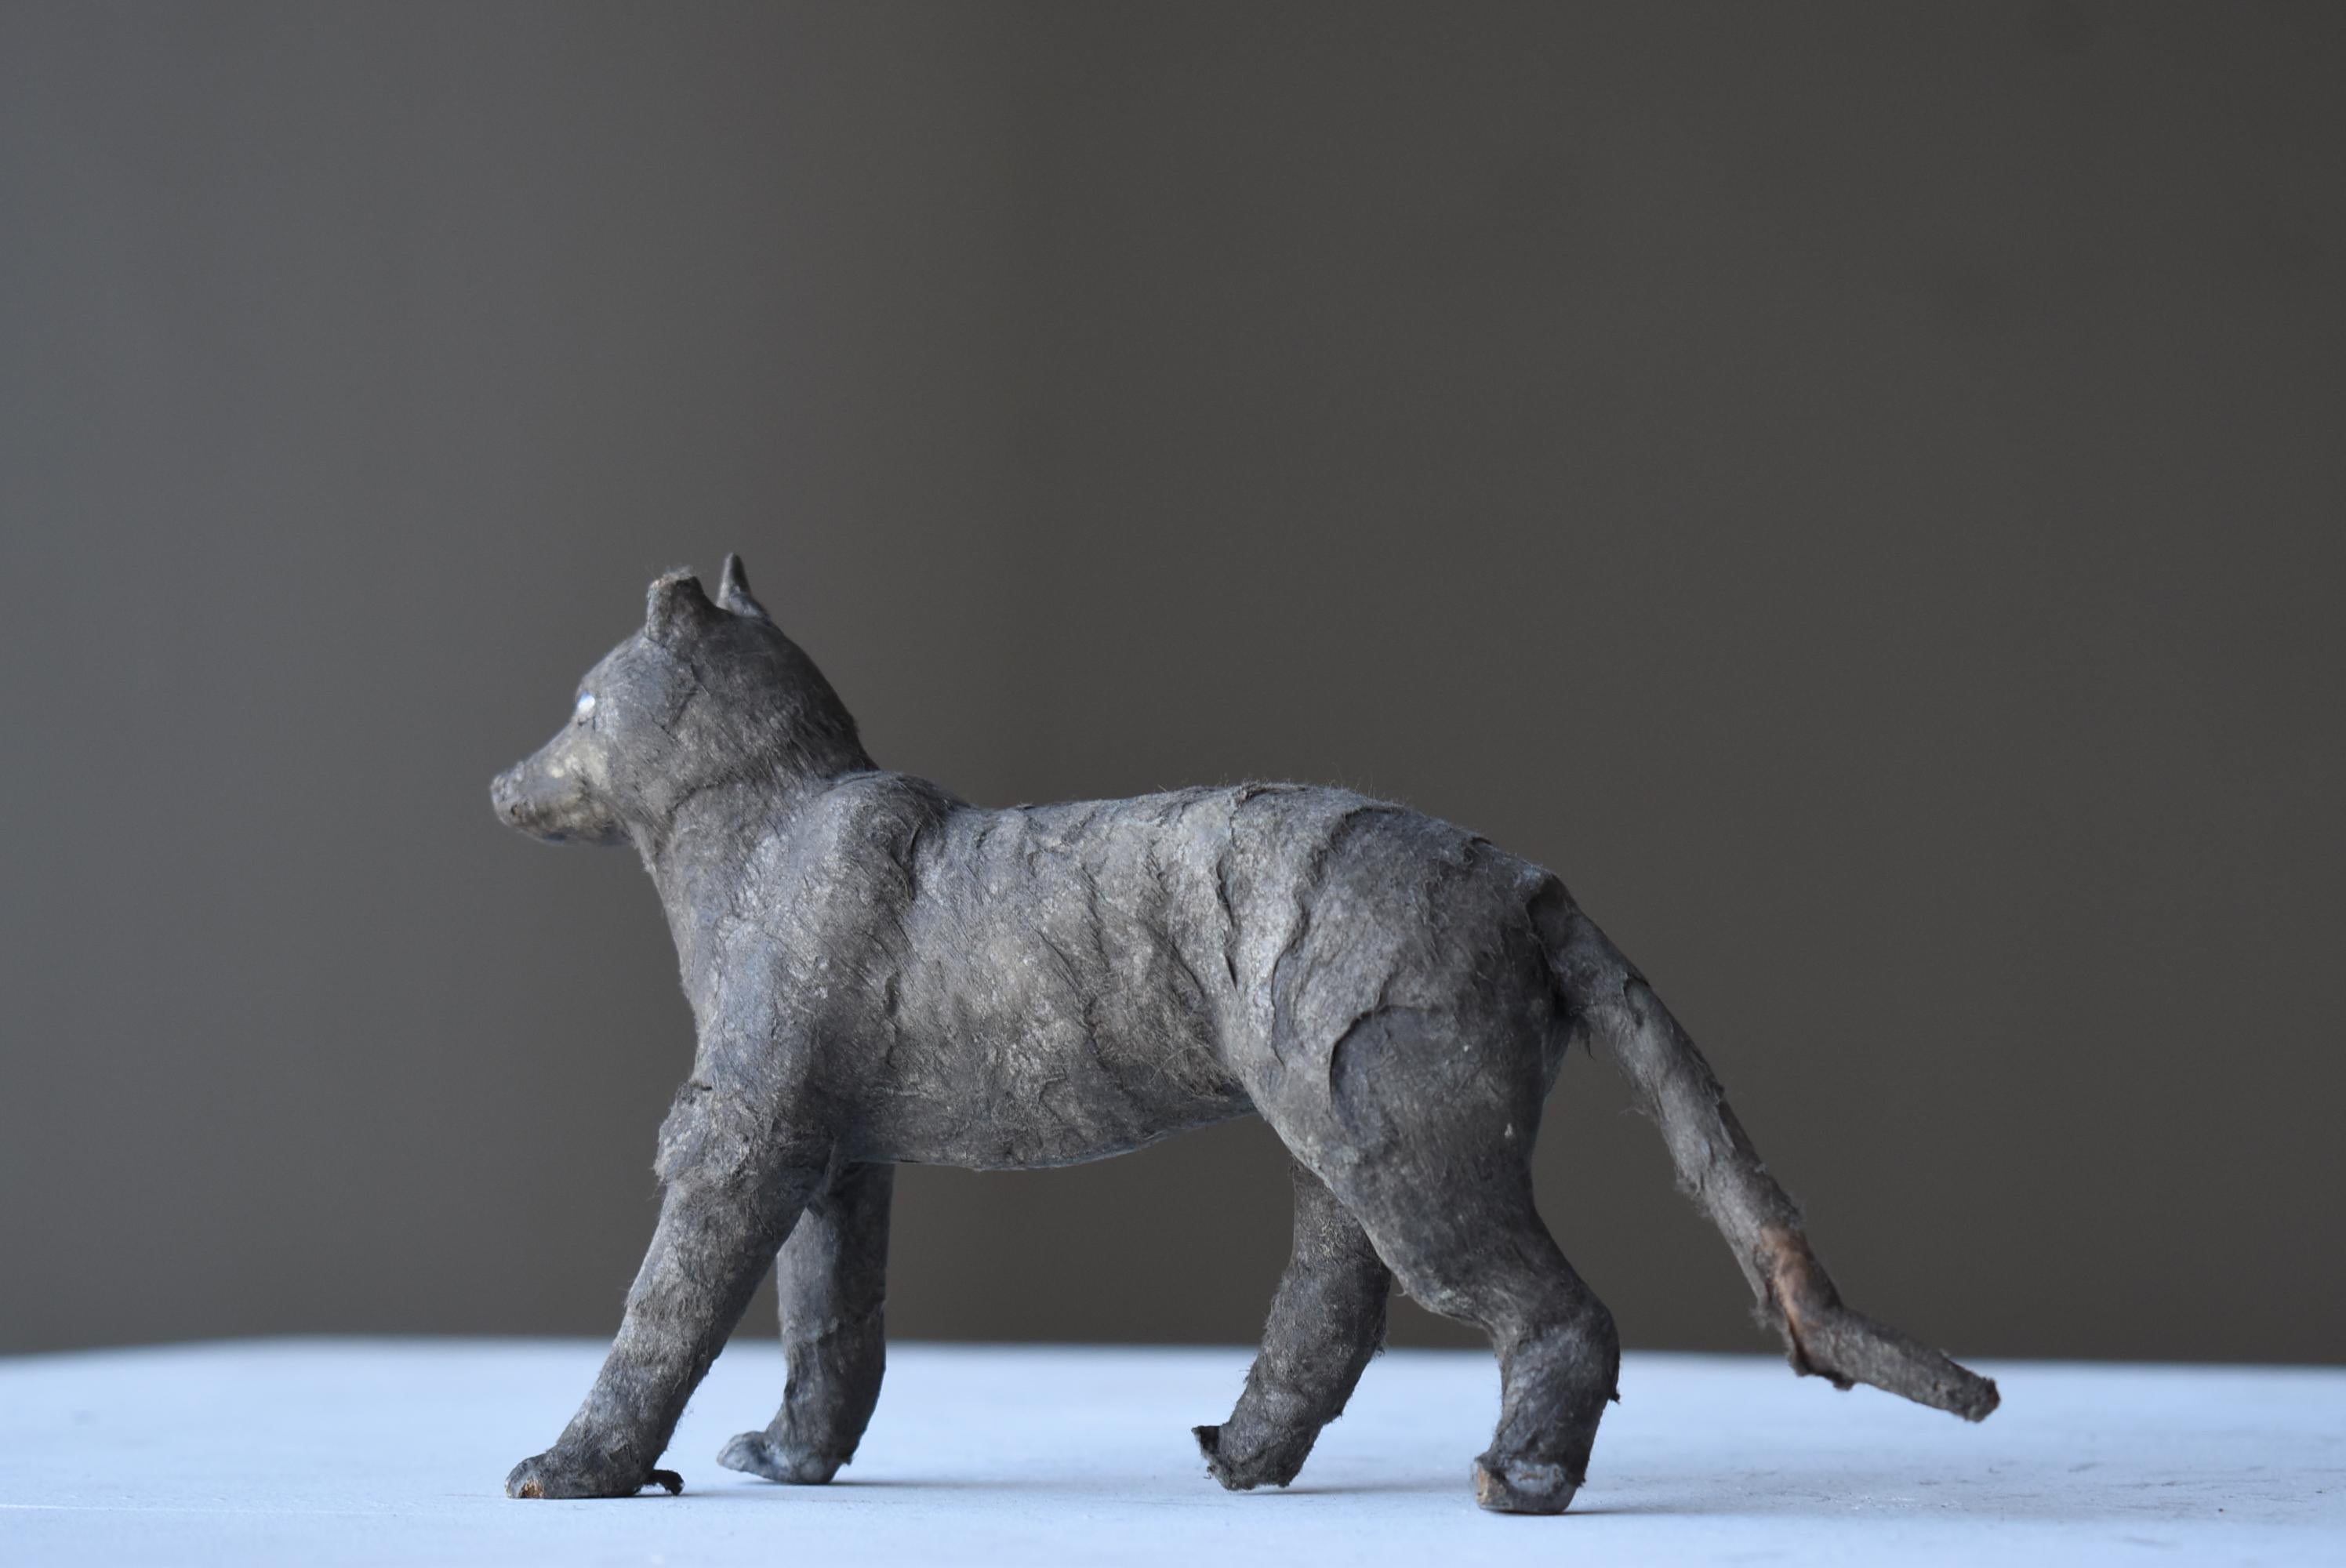 Very old Japanese wolf figurine.
This figurine dates from the mid-Showa period (1940s-1960s).
It is made by shaping it with a piece of wood and covering it with Japanese paper.
The texture of the fur is realistically expressed by the Japanese